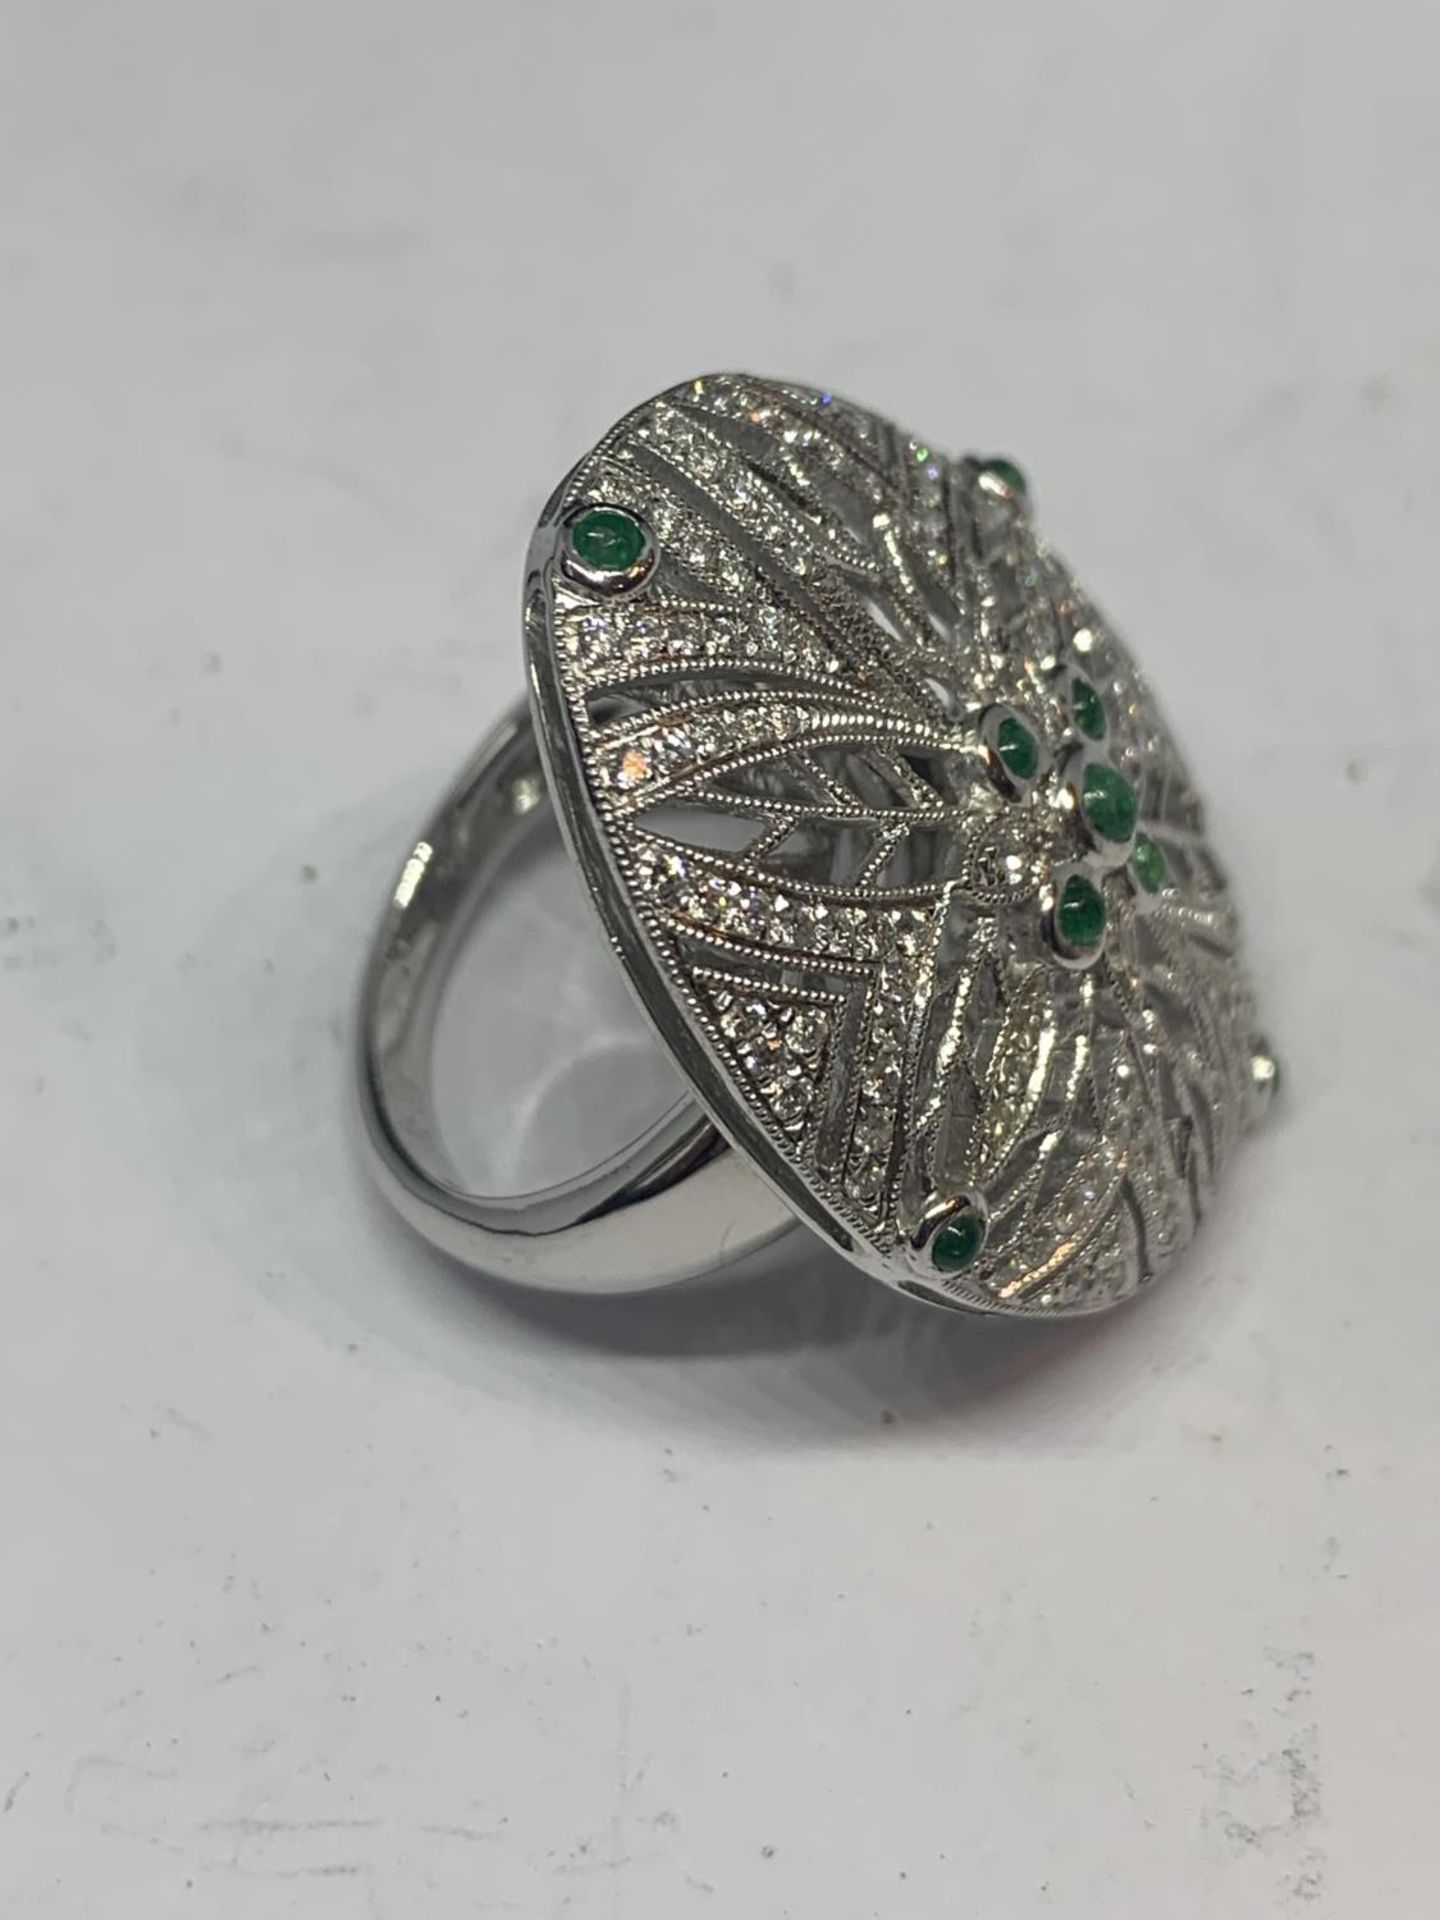 AN 18 CARAT WHITE GOLD DIAMOND AND EMERALD COCKTAIL RING GROSS WEIGHT 13.2 GRAMS SIZE O/P - Image 4 of 8